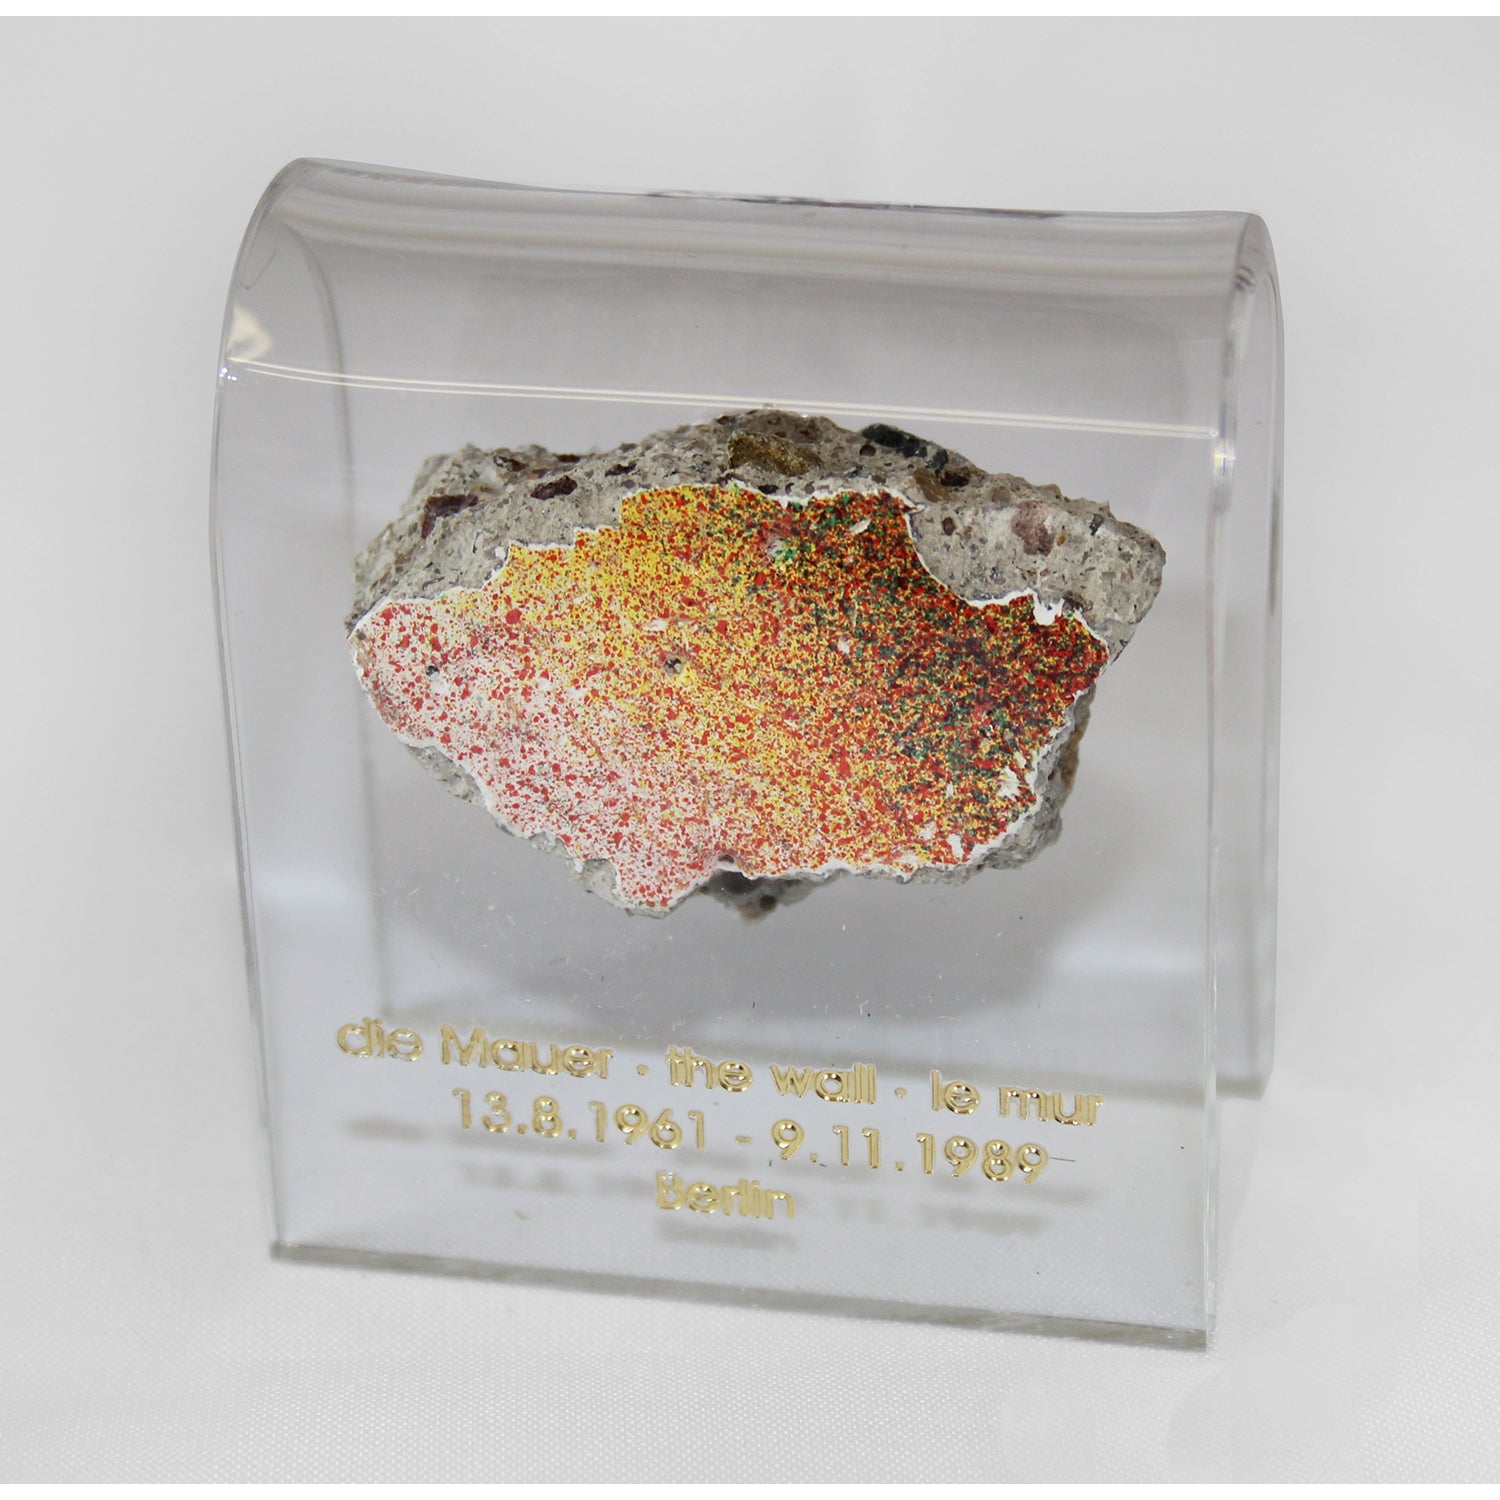 A Piece of the Berlin Wall in an Acrylic Display - Size S